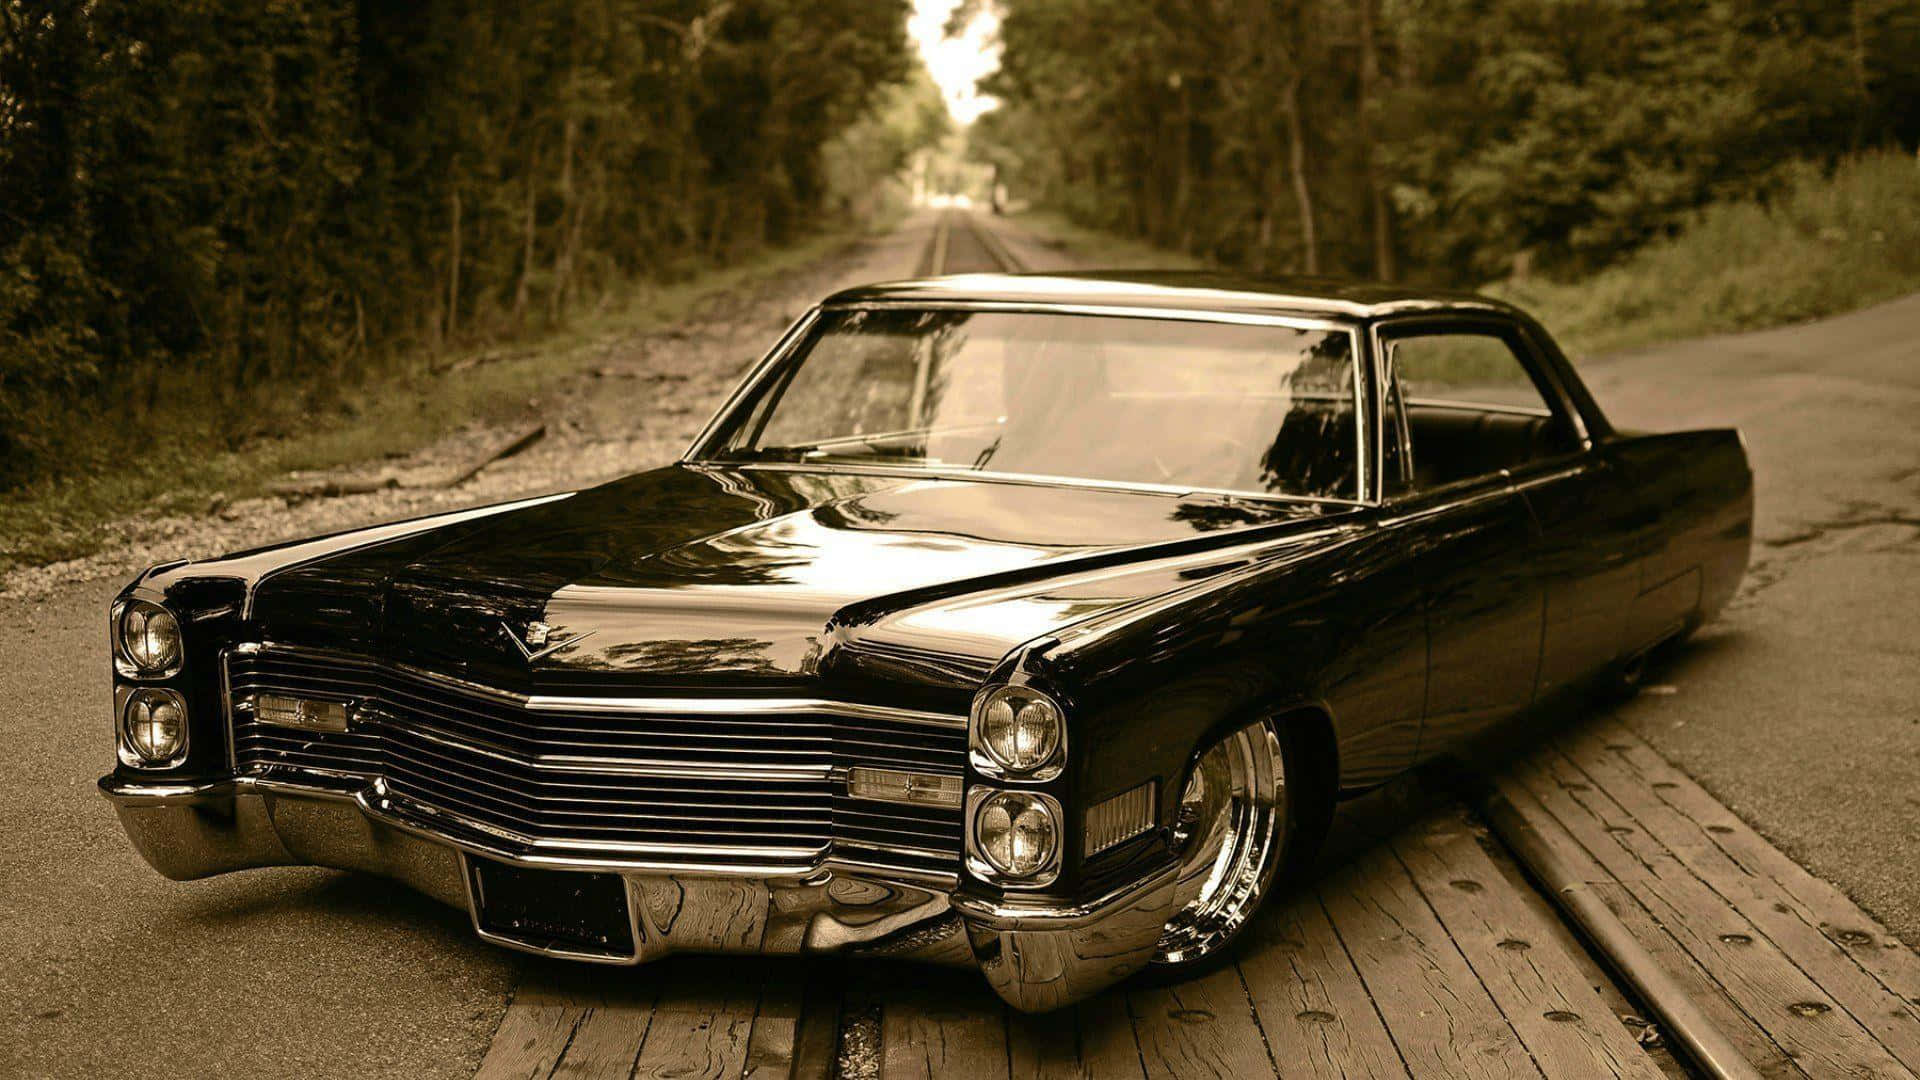 The Classic Cadillac - Timeless Auto Design at Its Best